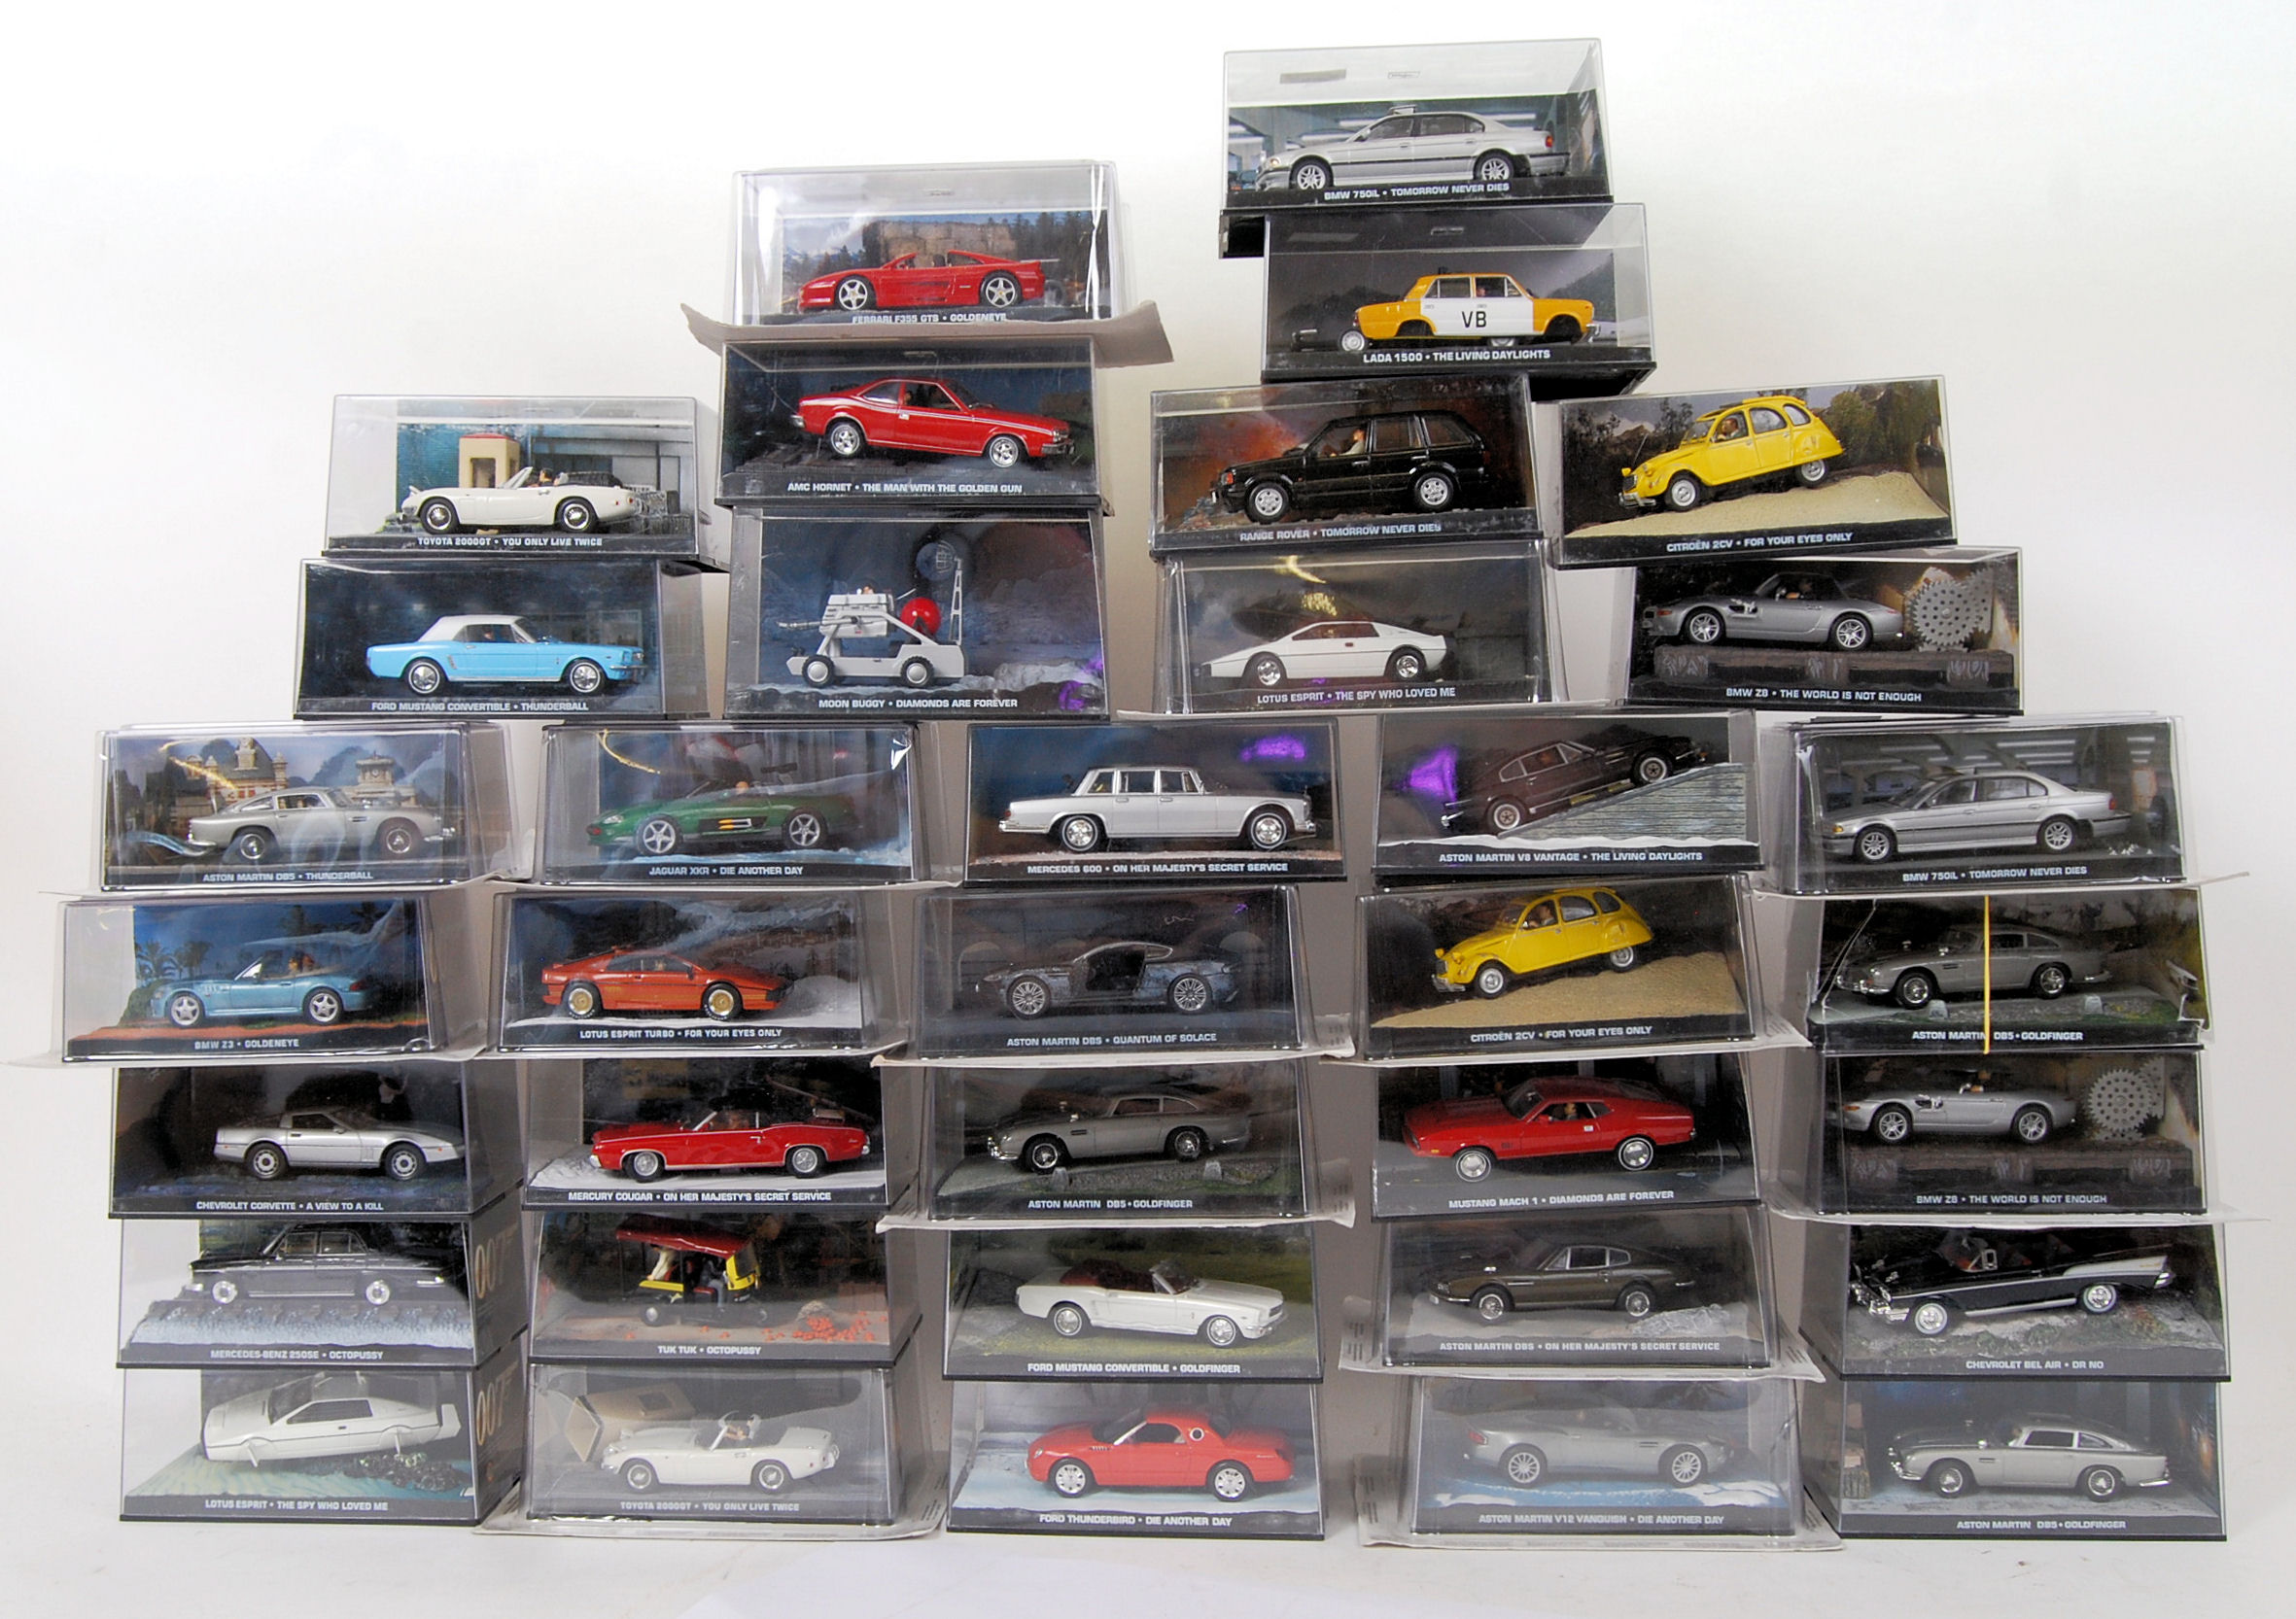 JAMES BOND: A collection of 36x Eaglemoss James Bond diecast model cars, some with diorama bases.